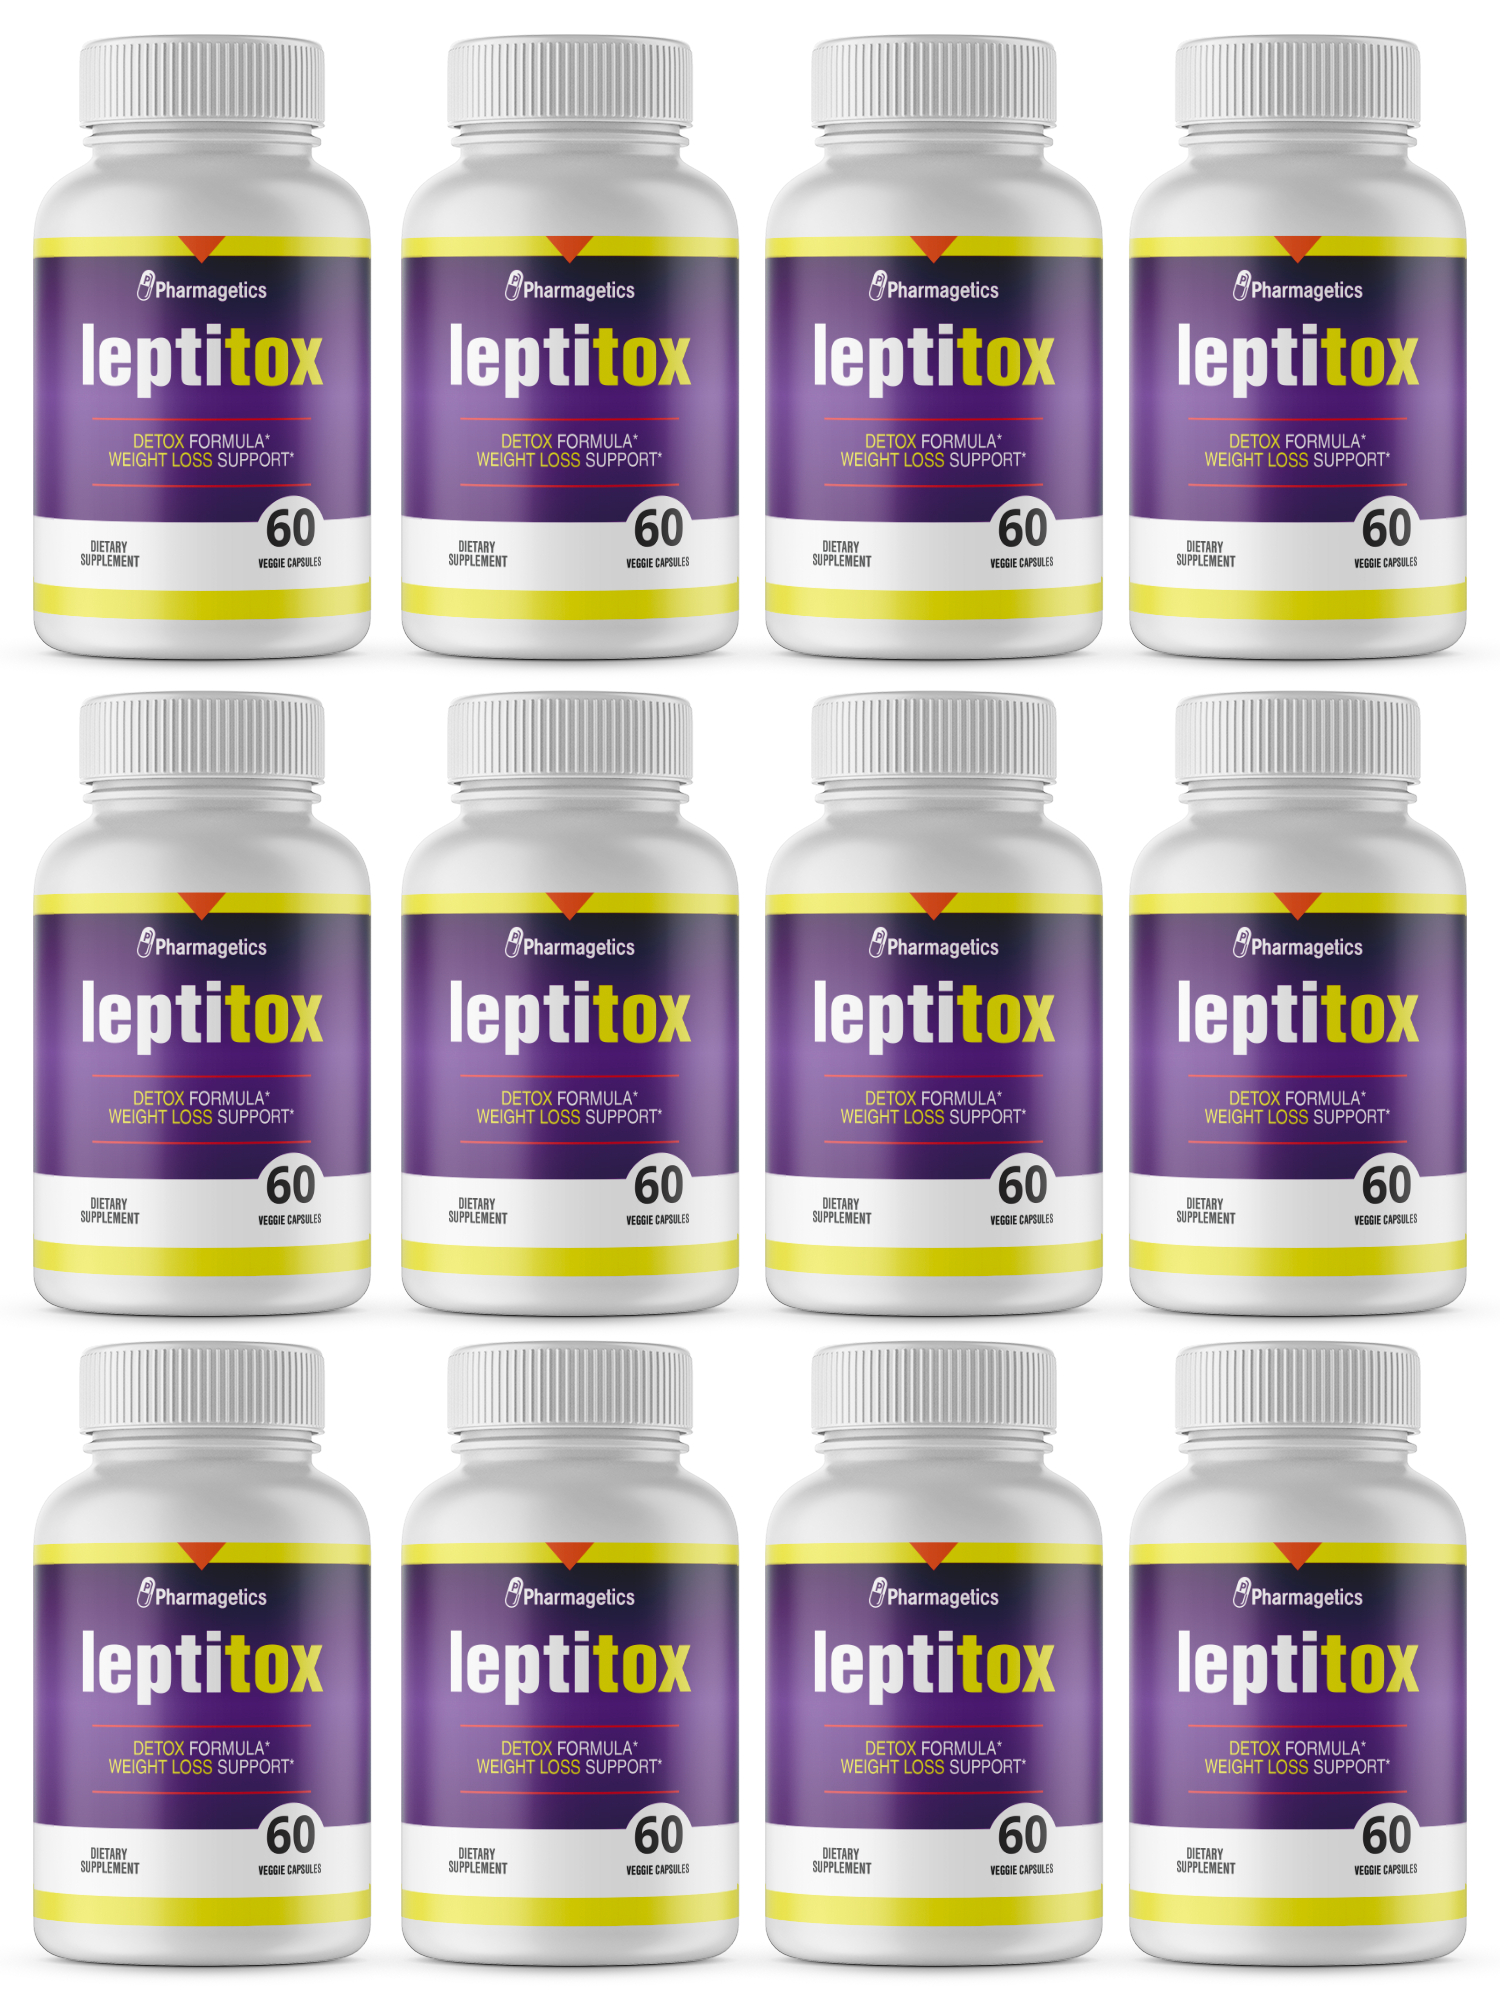 Leptitox Detox Formula  Weight Loss Support 60 Capsules - 12 Bottles